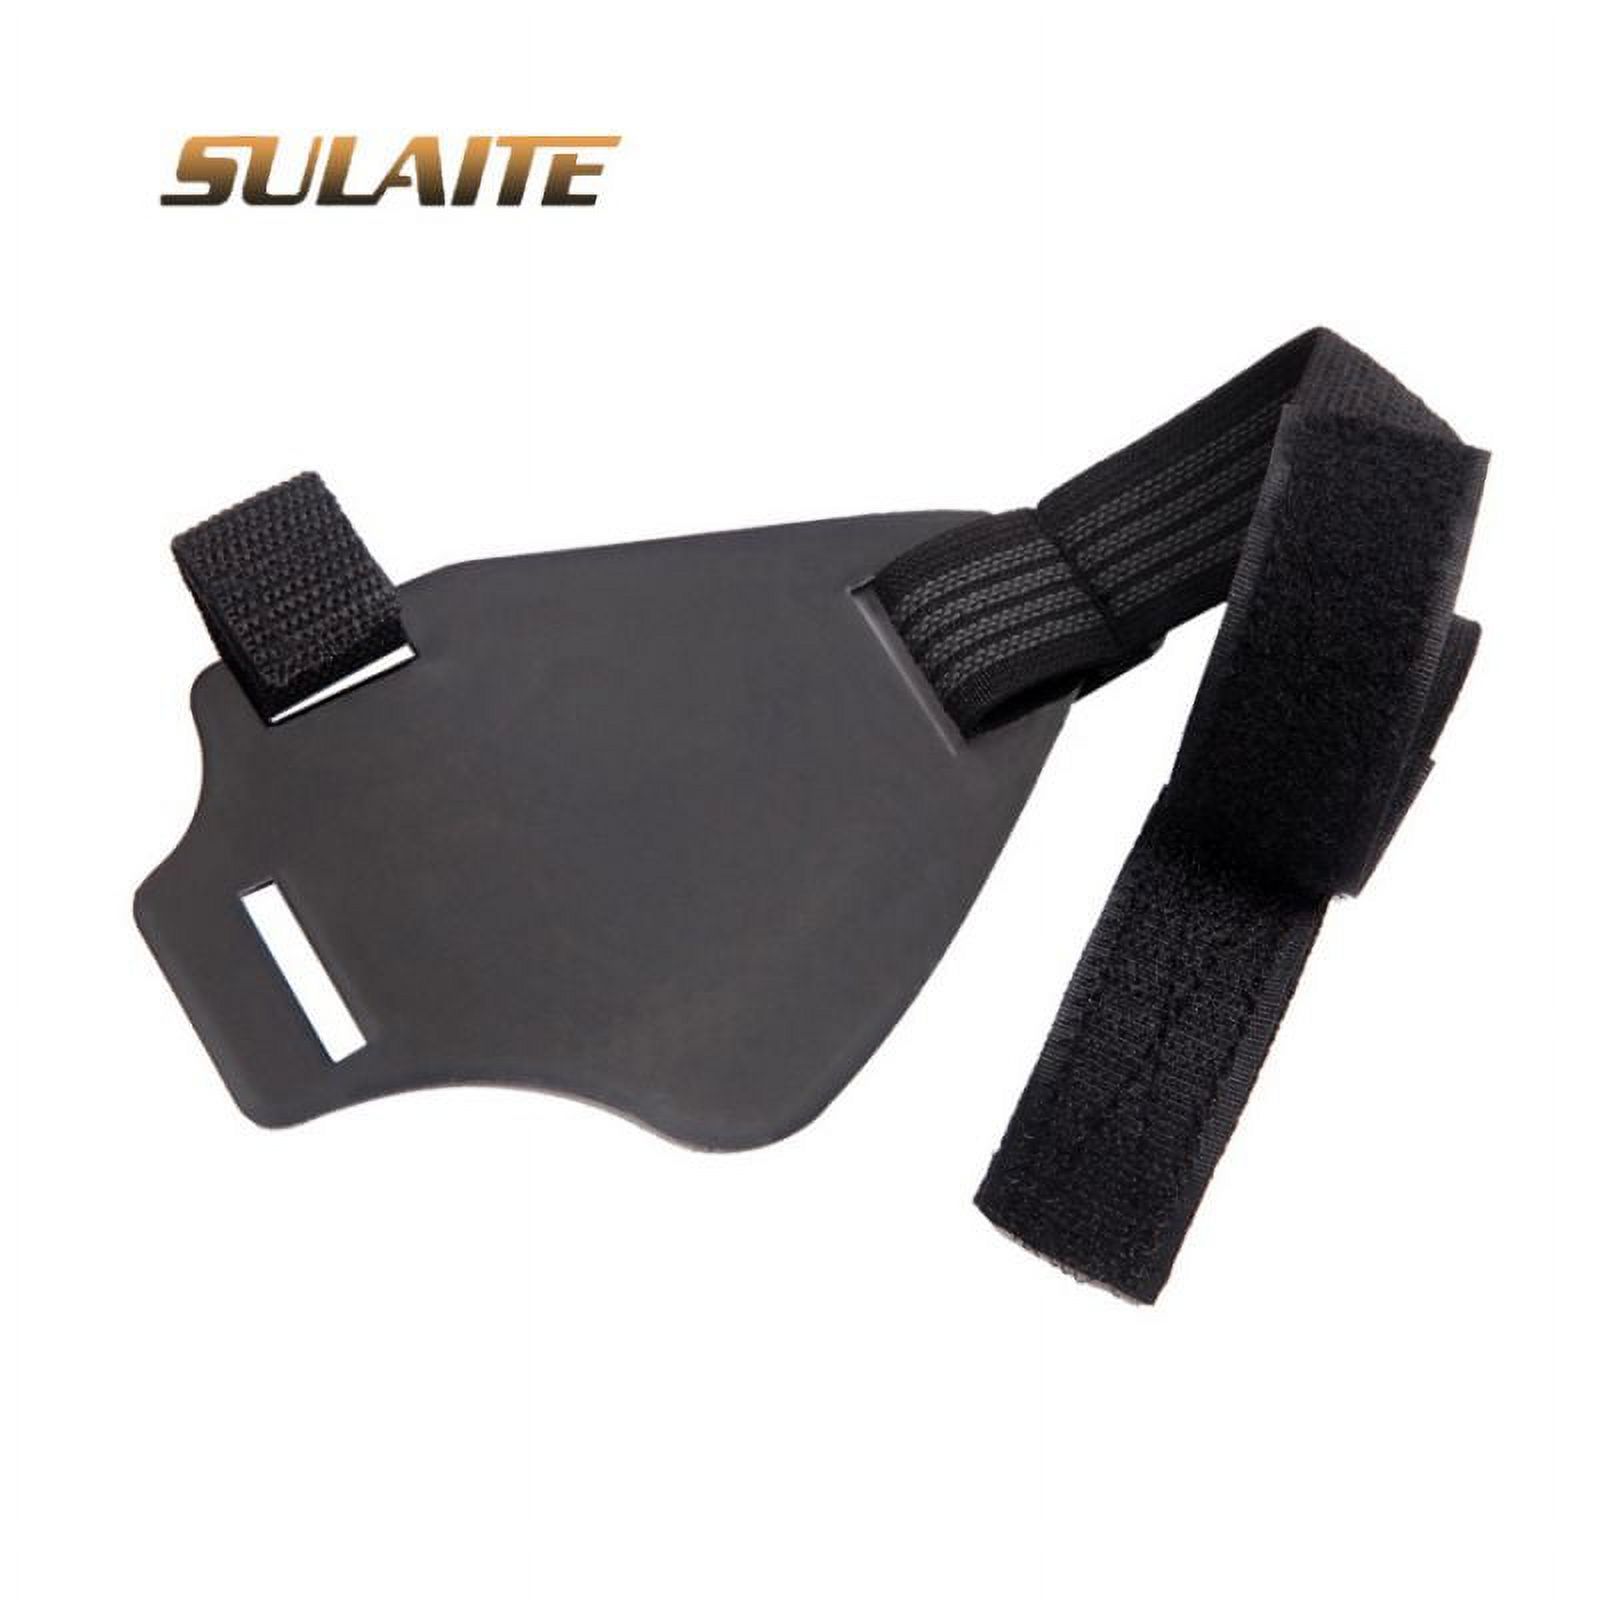 Stronger Rubber Motorcycle Gear Shifter Shoe Boots Protector Shift Motorbike Boot Cover Protective Gear - image 2 of 5